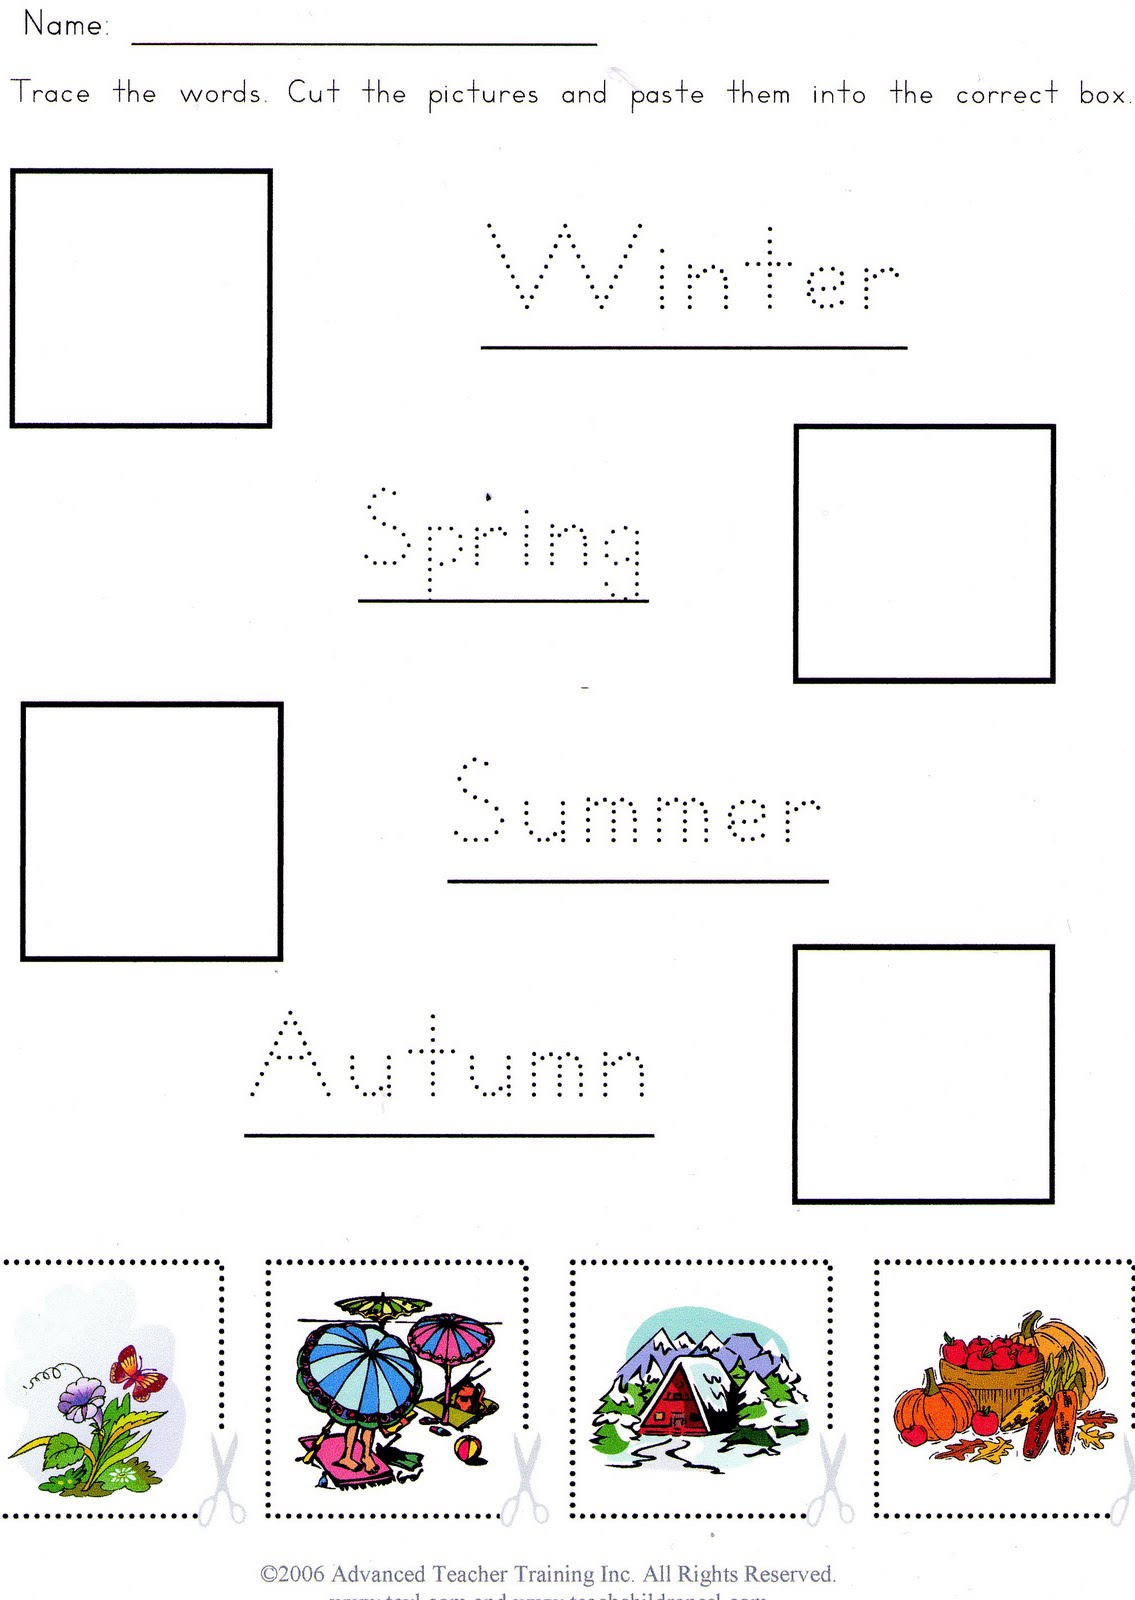 fruit and vegetables names in english Four Seasons Worksheets | 1135 x 1600